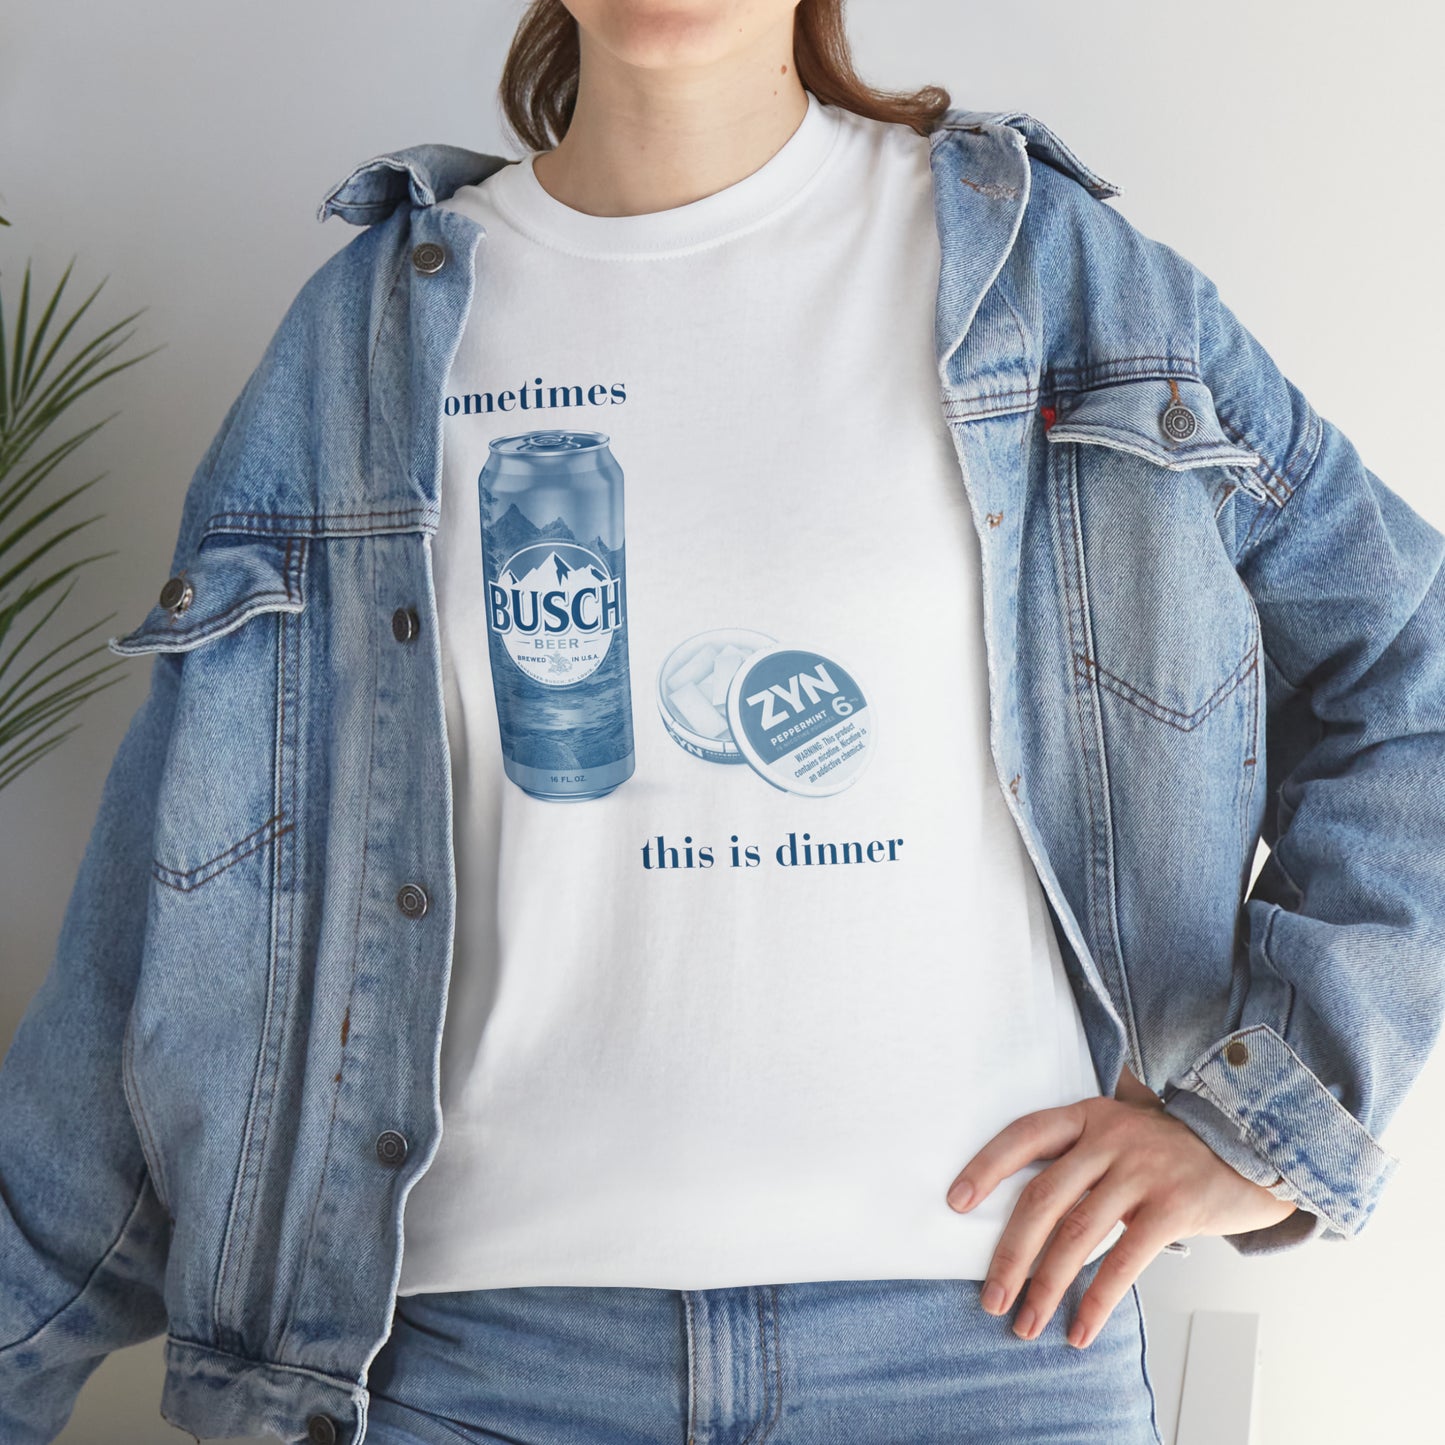 Sometimes this is dinner Busch and Zyns 6mg - Unisex Heavy Cotton Tee